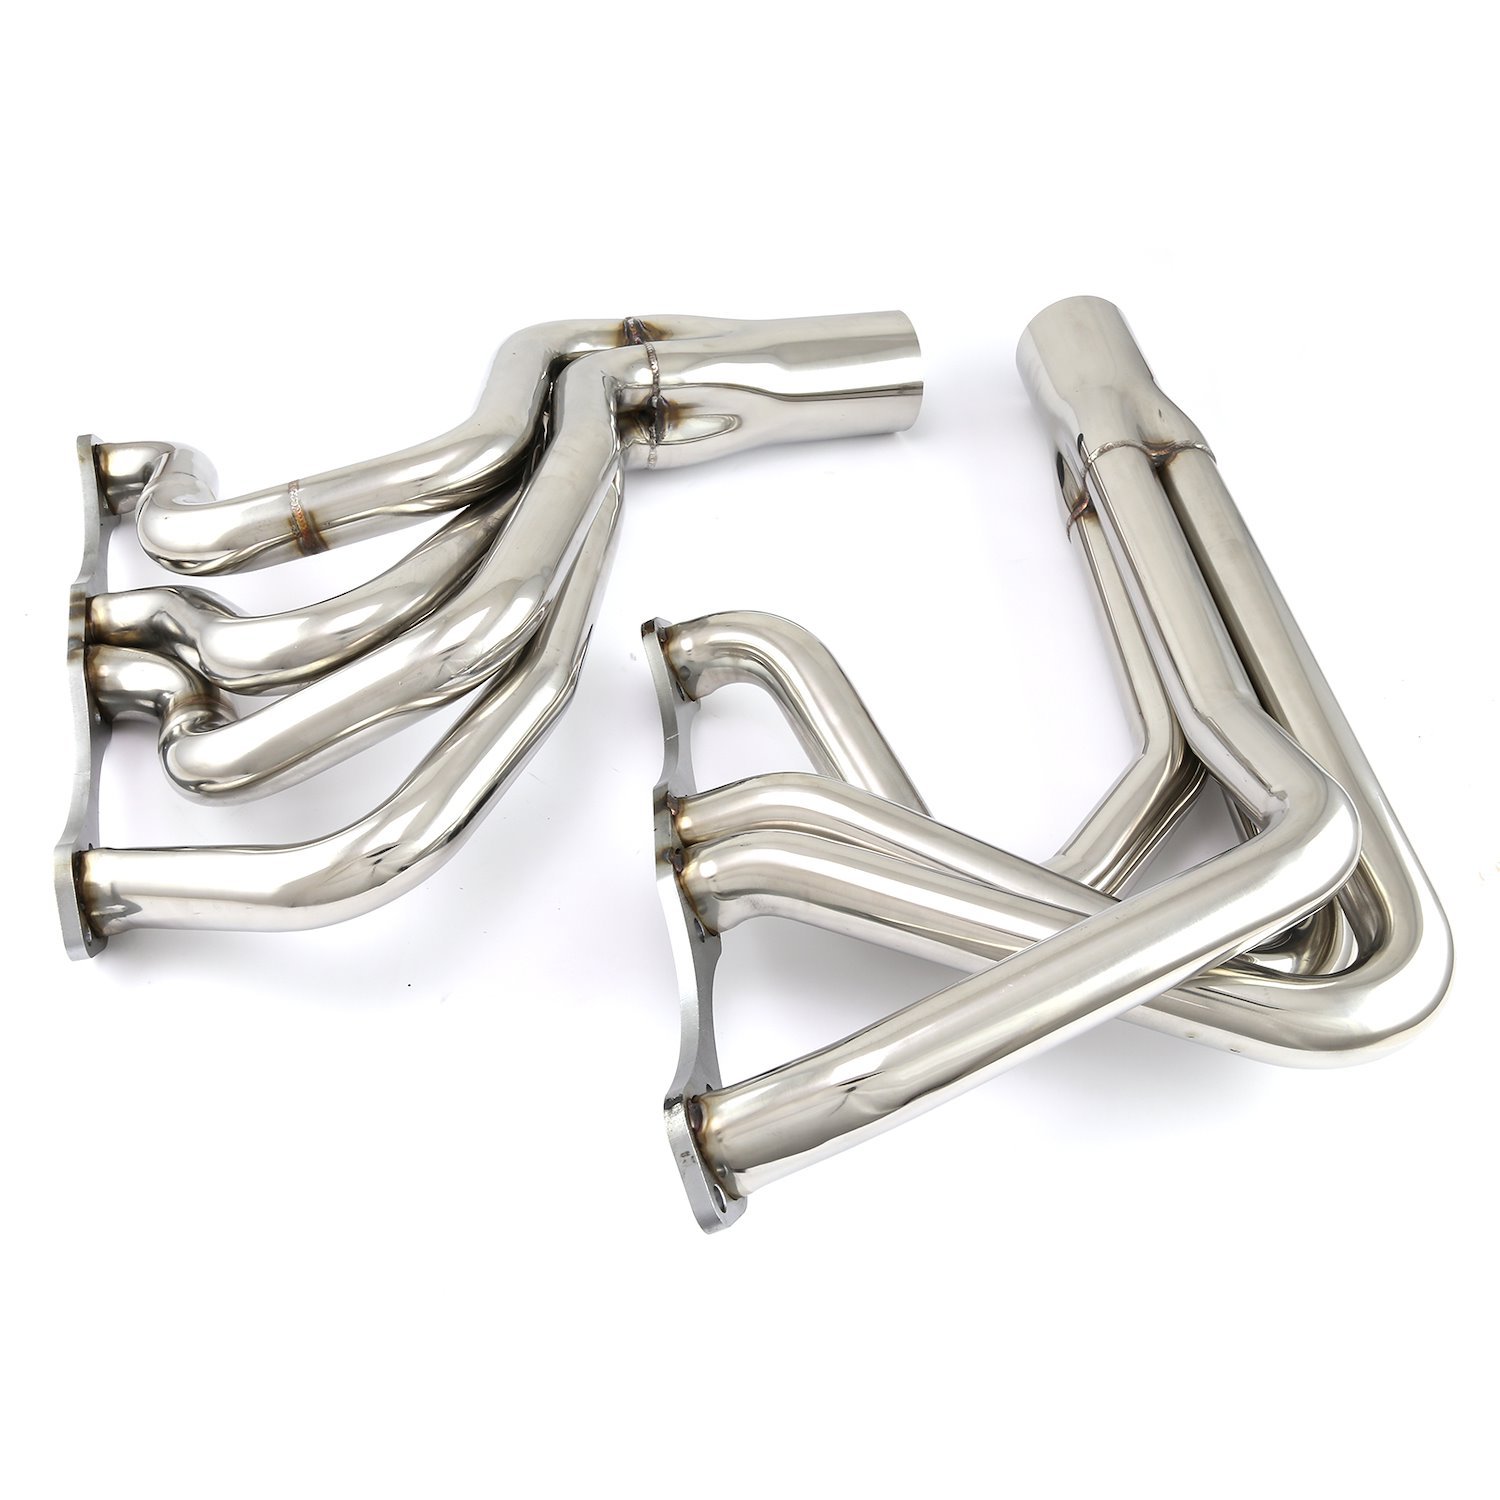 Chevy SBC 350 IMCA MODIFIED Stainless Steel Exhaust